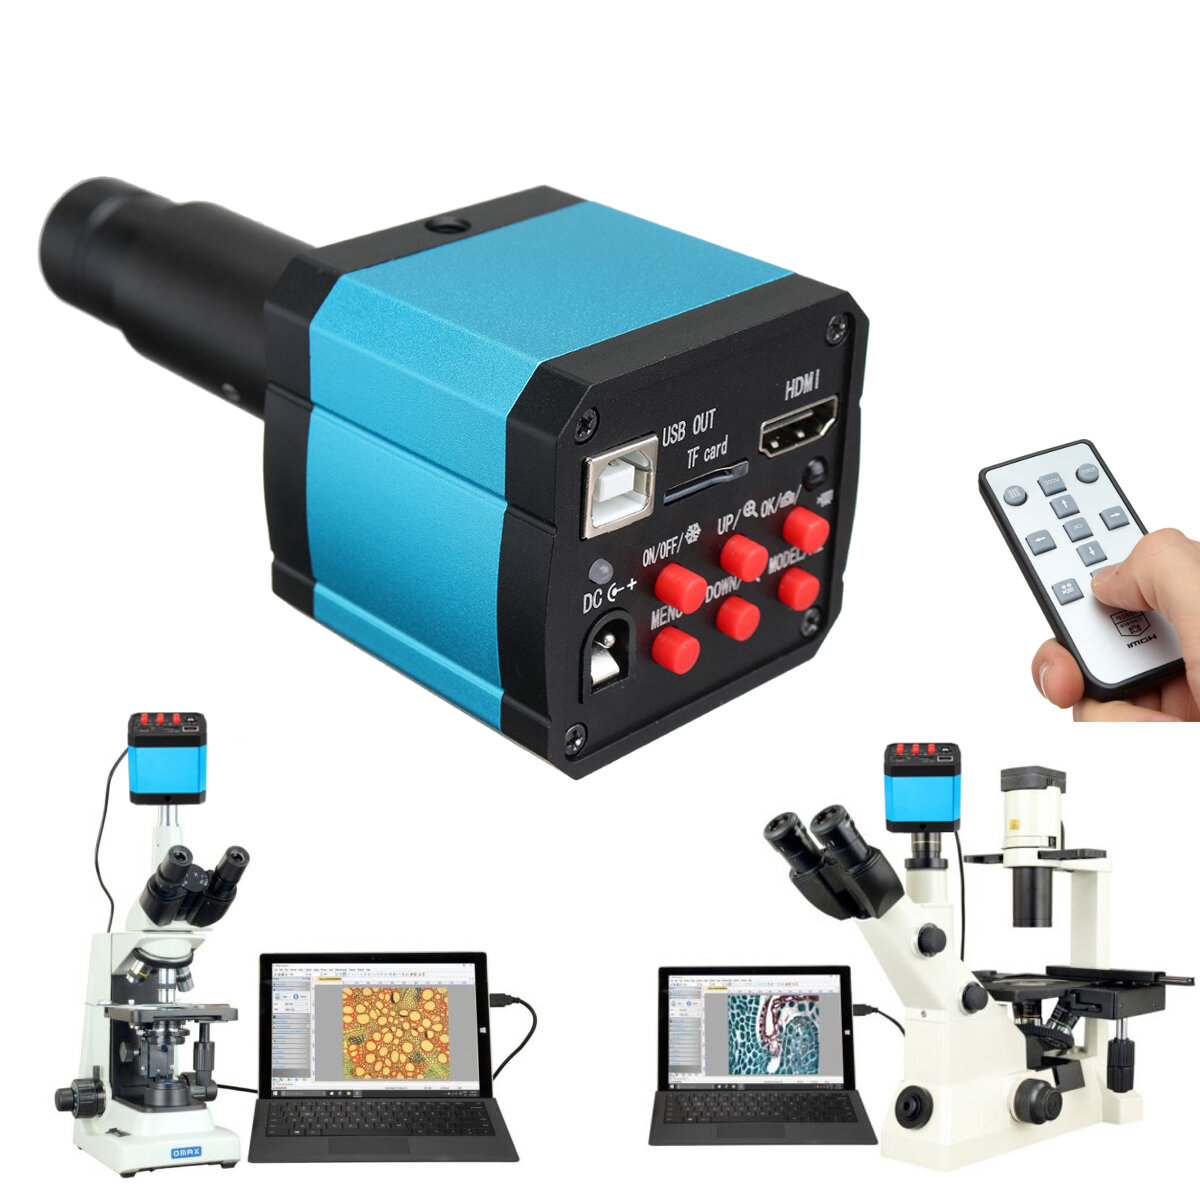 HAYEAR 16MP 1080P 60FPS USB C-mount Digital Industry Video Microscope Camera with HDMI Cable